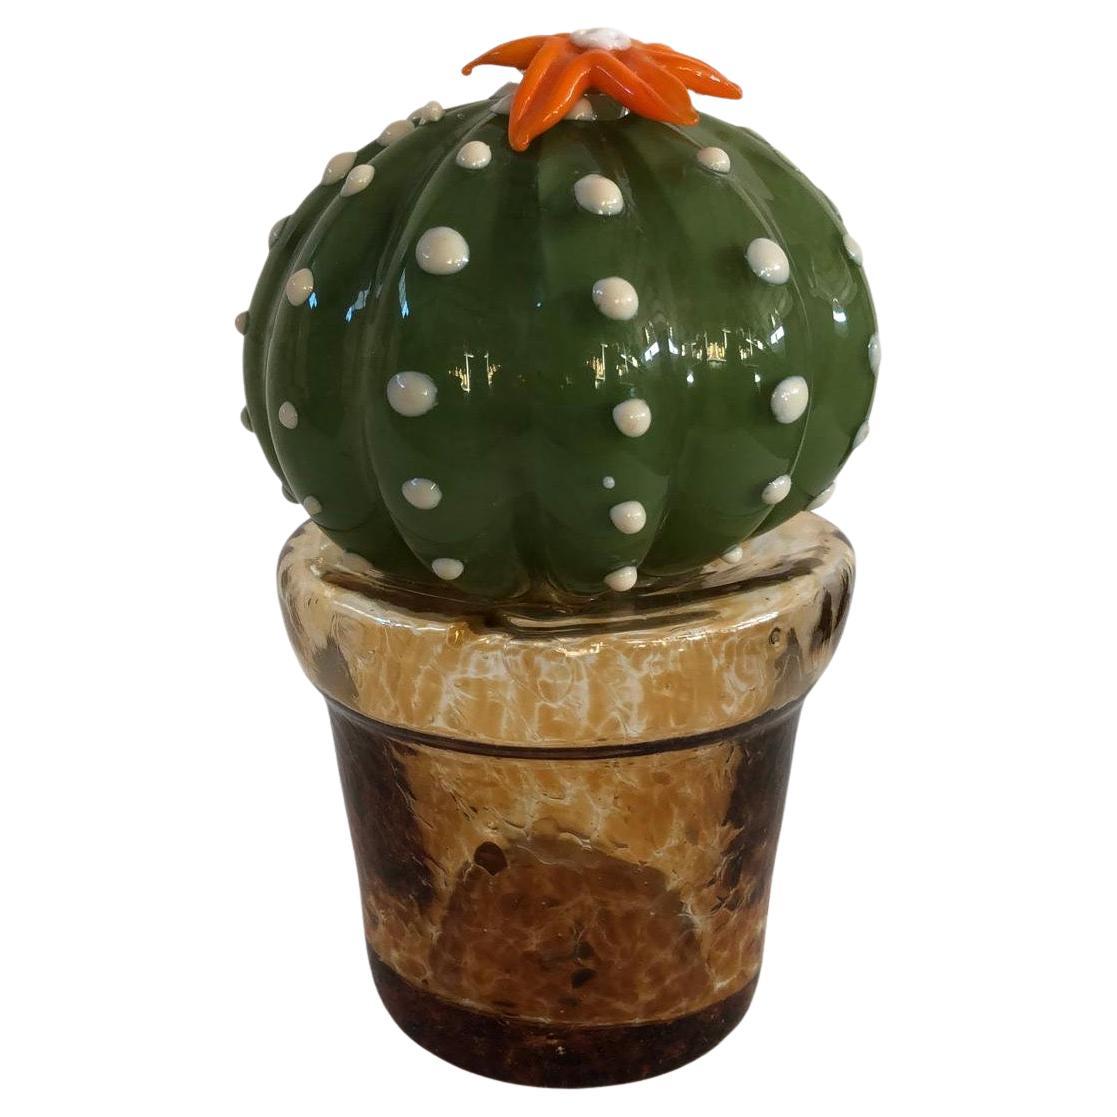 Murano Art Glass Green and Orange Cactus Plant, 1990 For Sale at 1stDibs